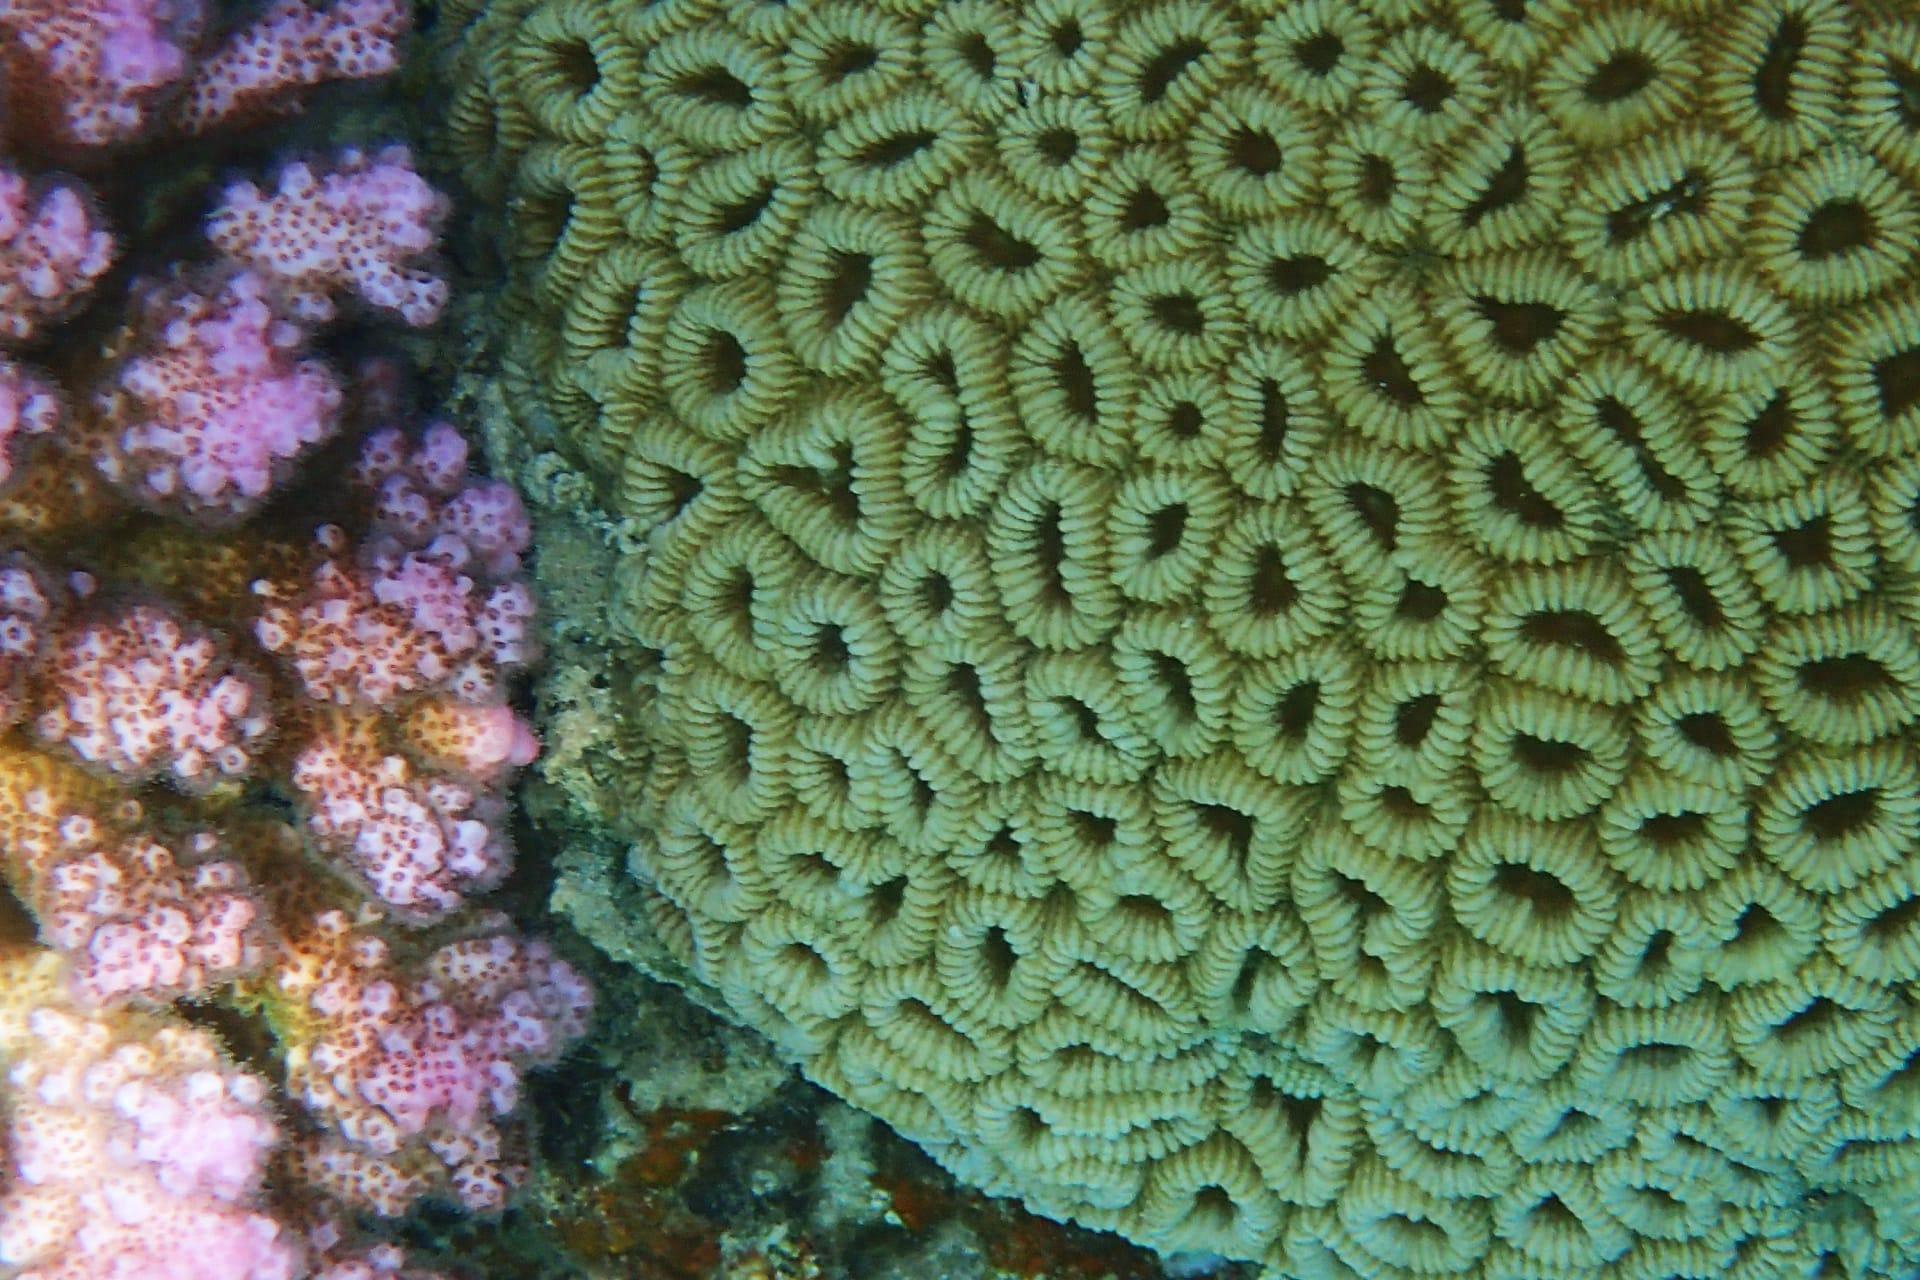 Brain coral pictures